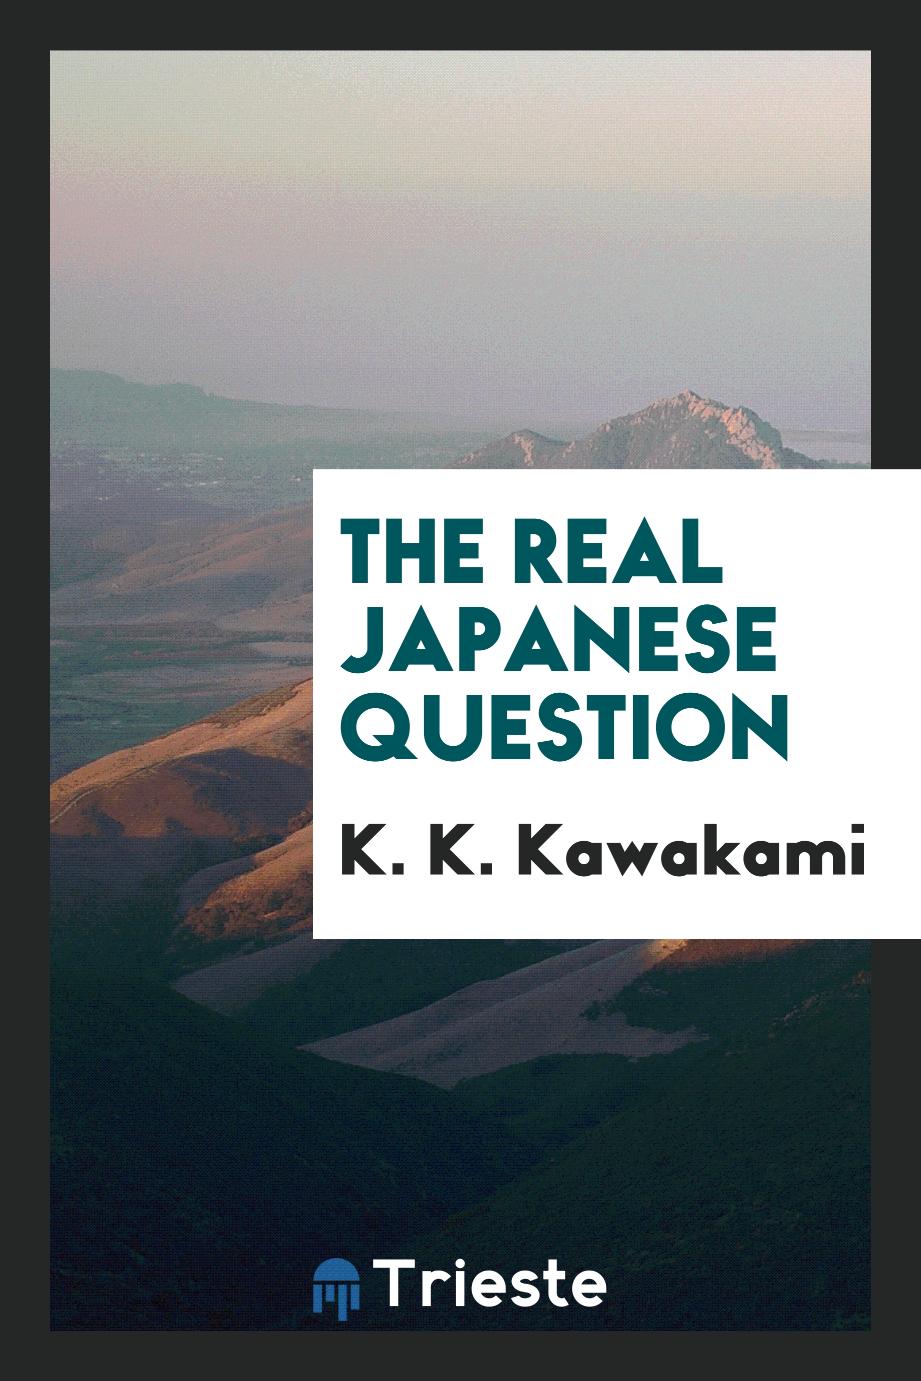 The real Japanese question